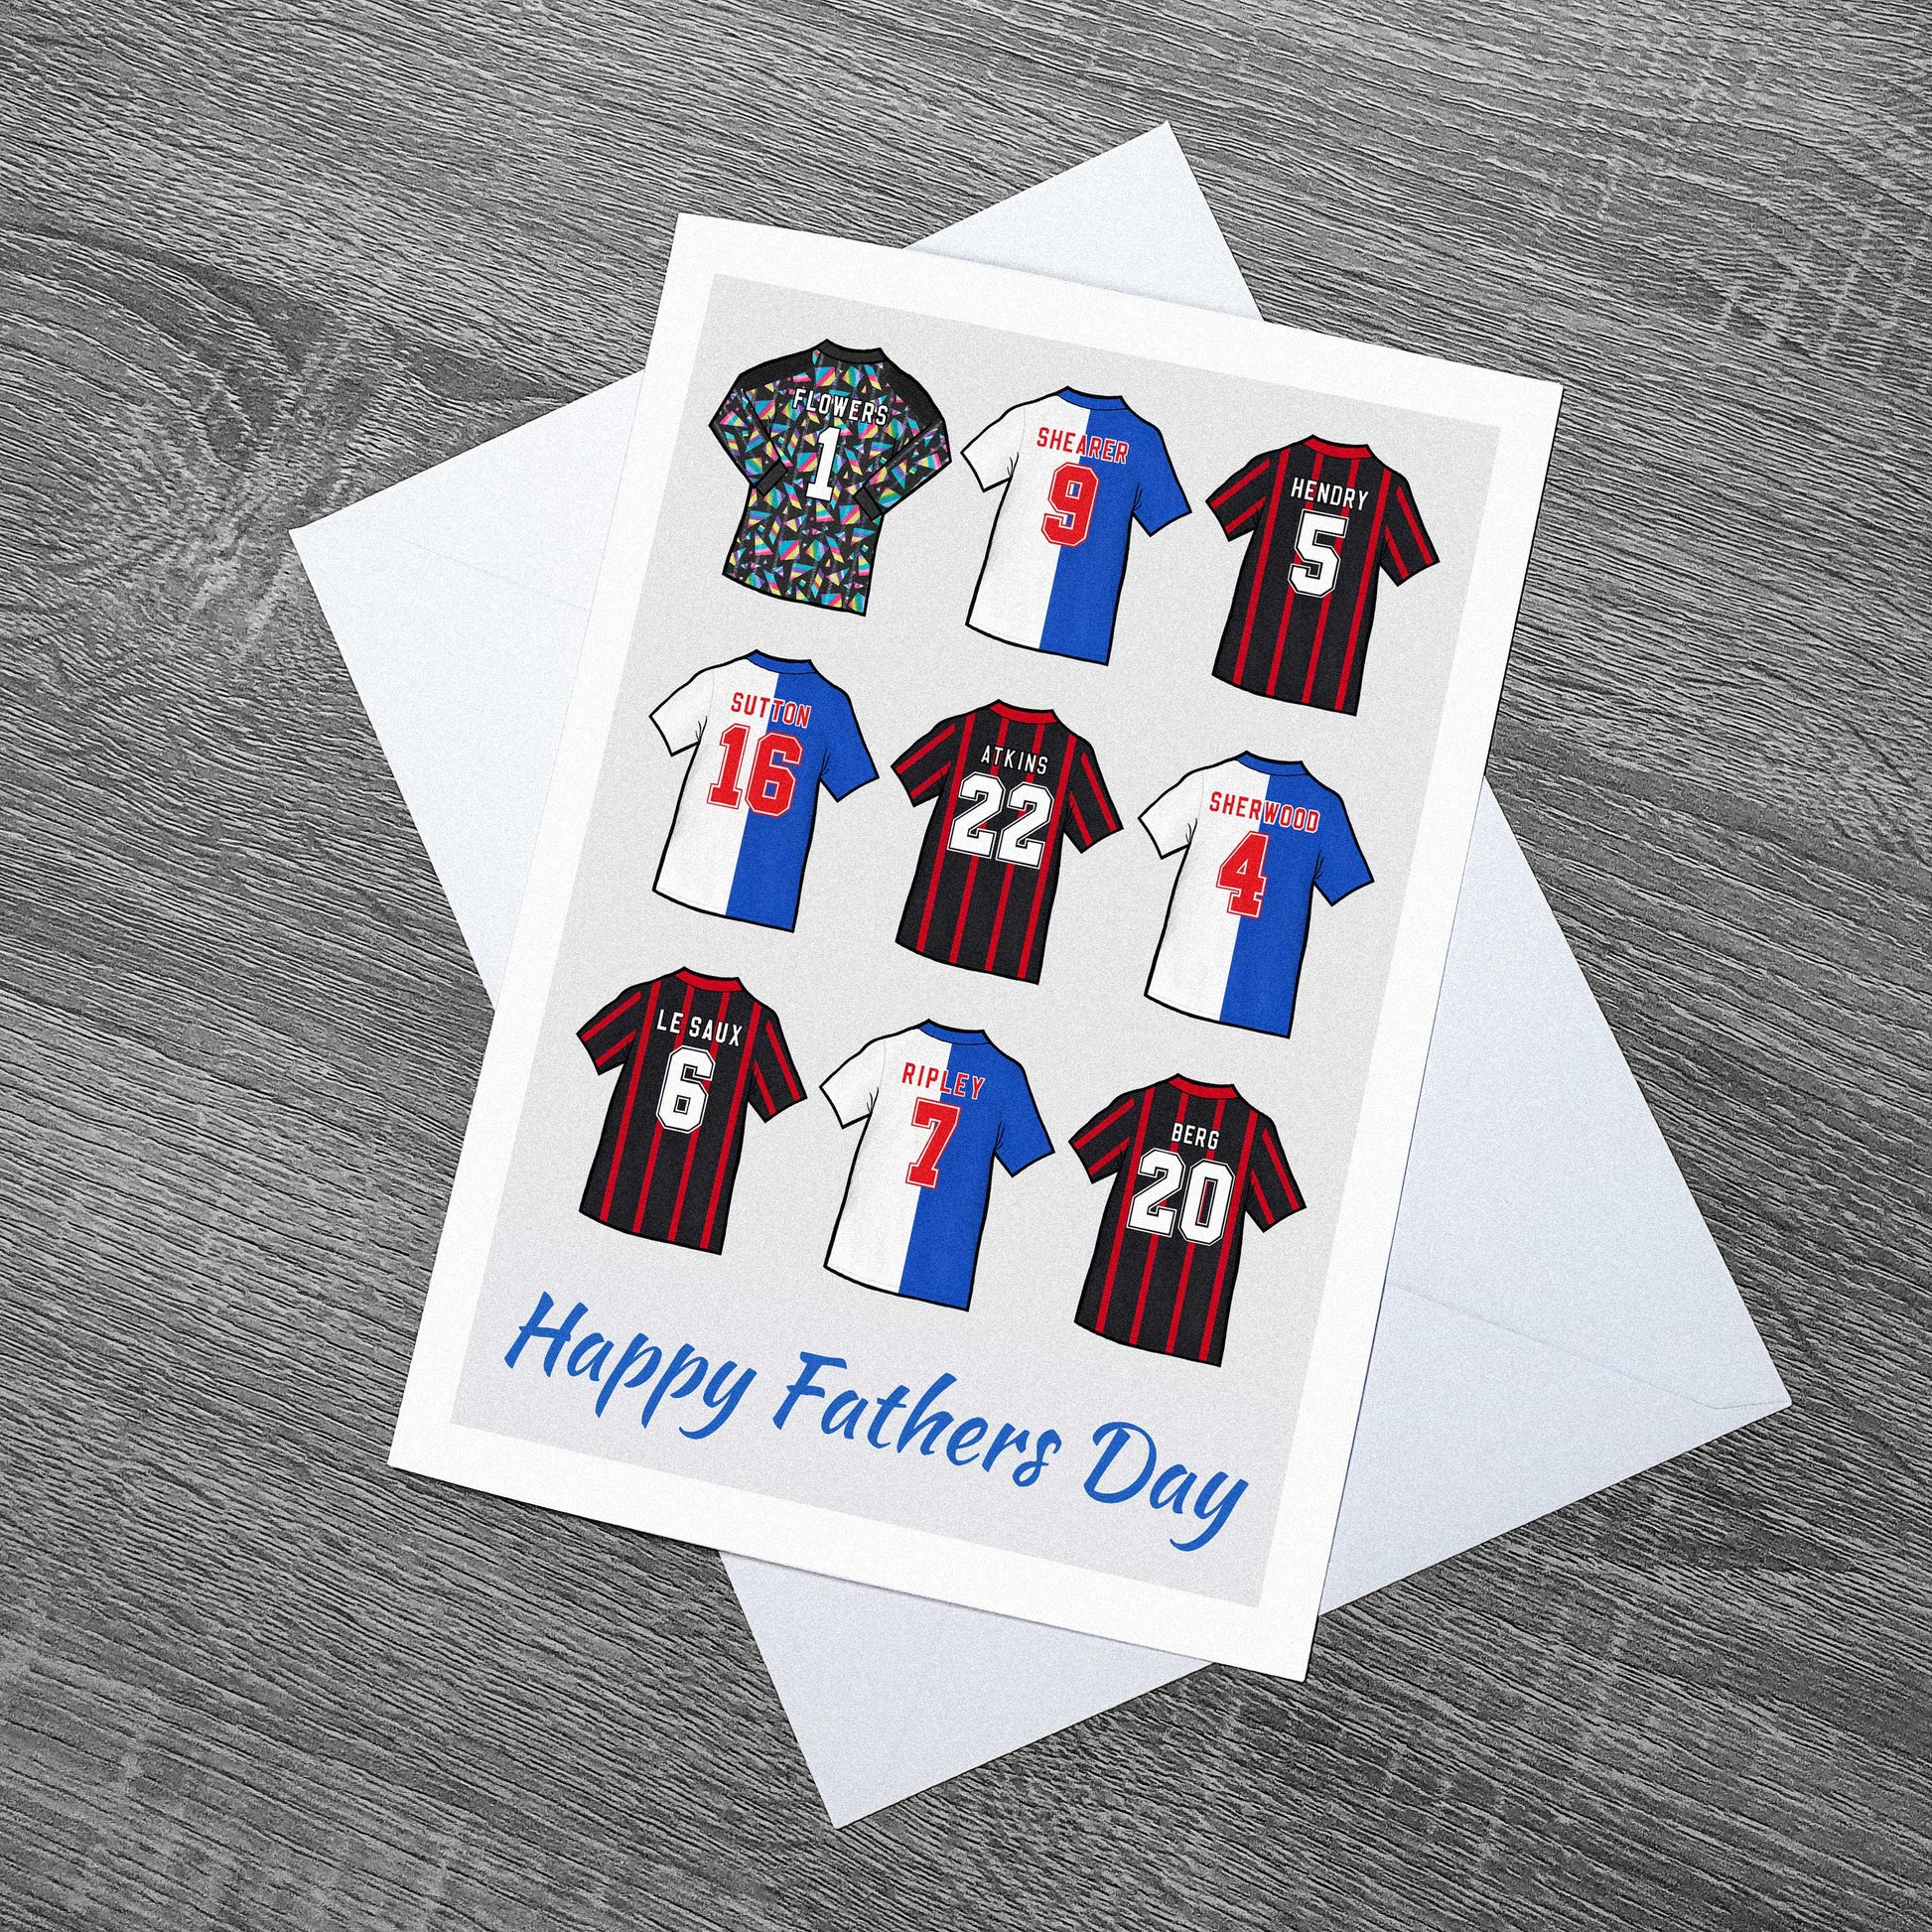 Fathers day card inspired by the legendary players to play for Blackburn Rovers